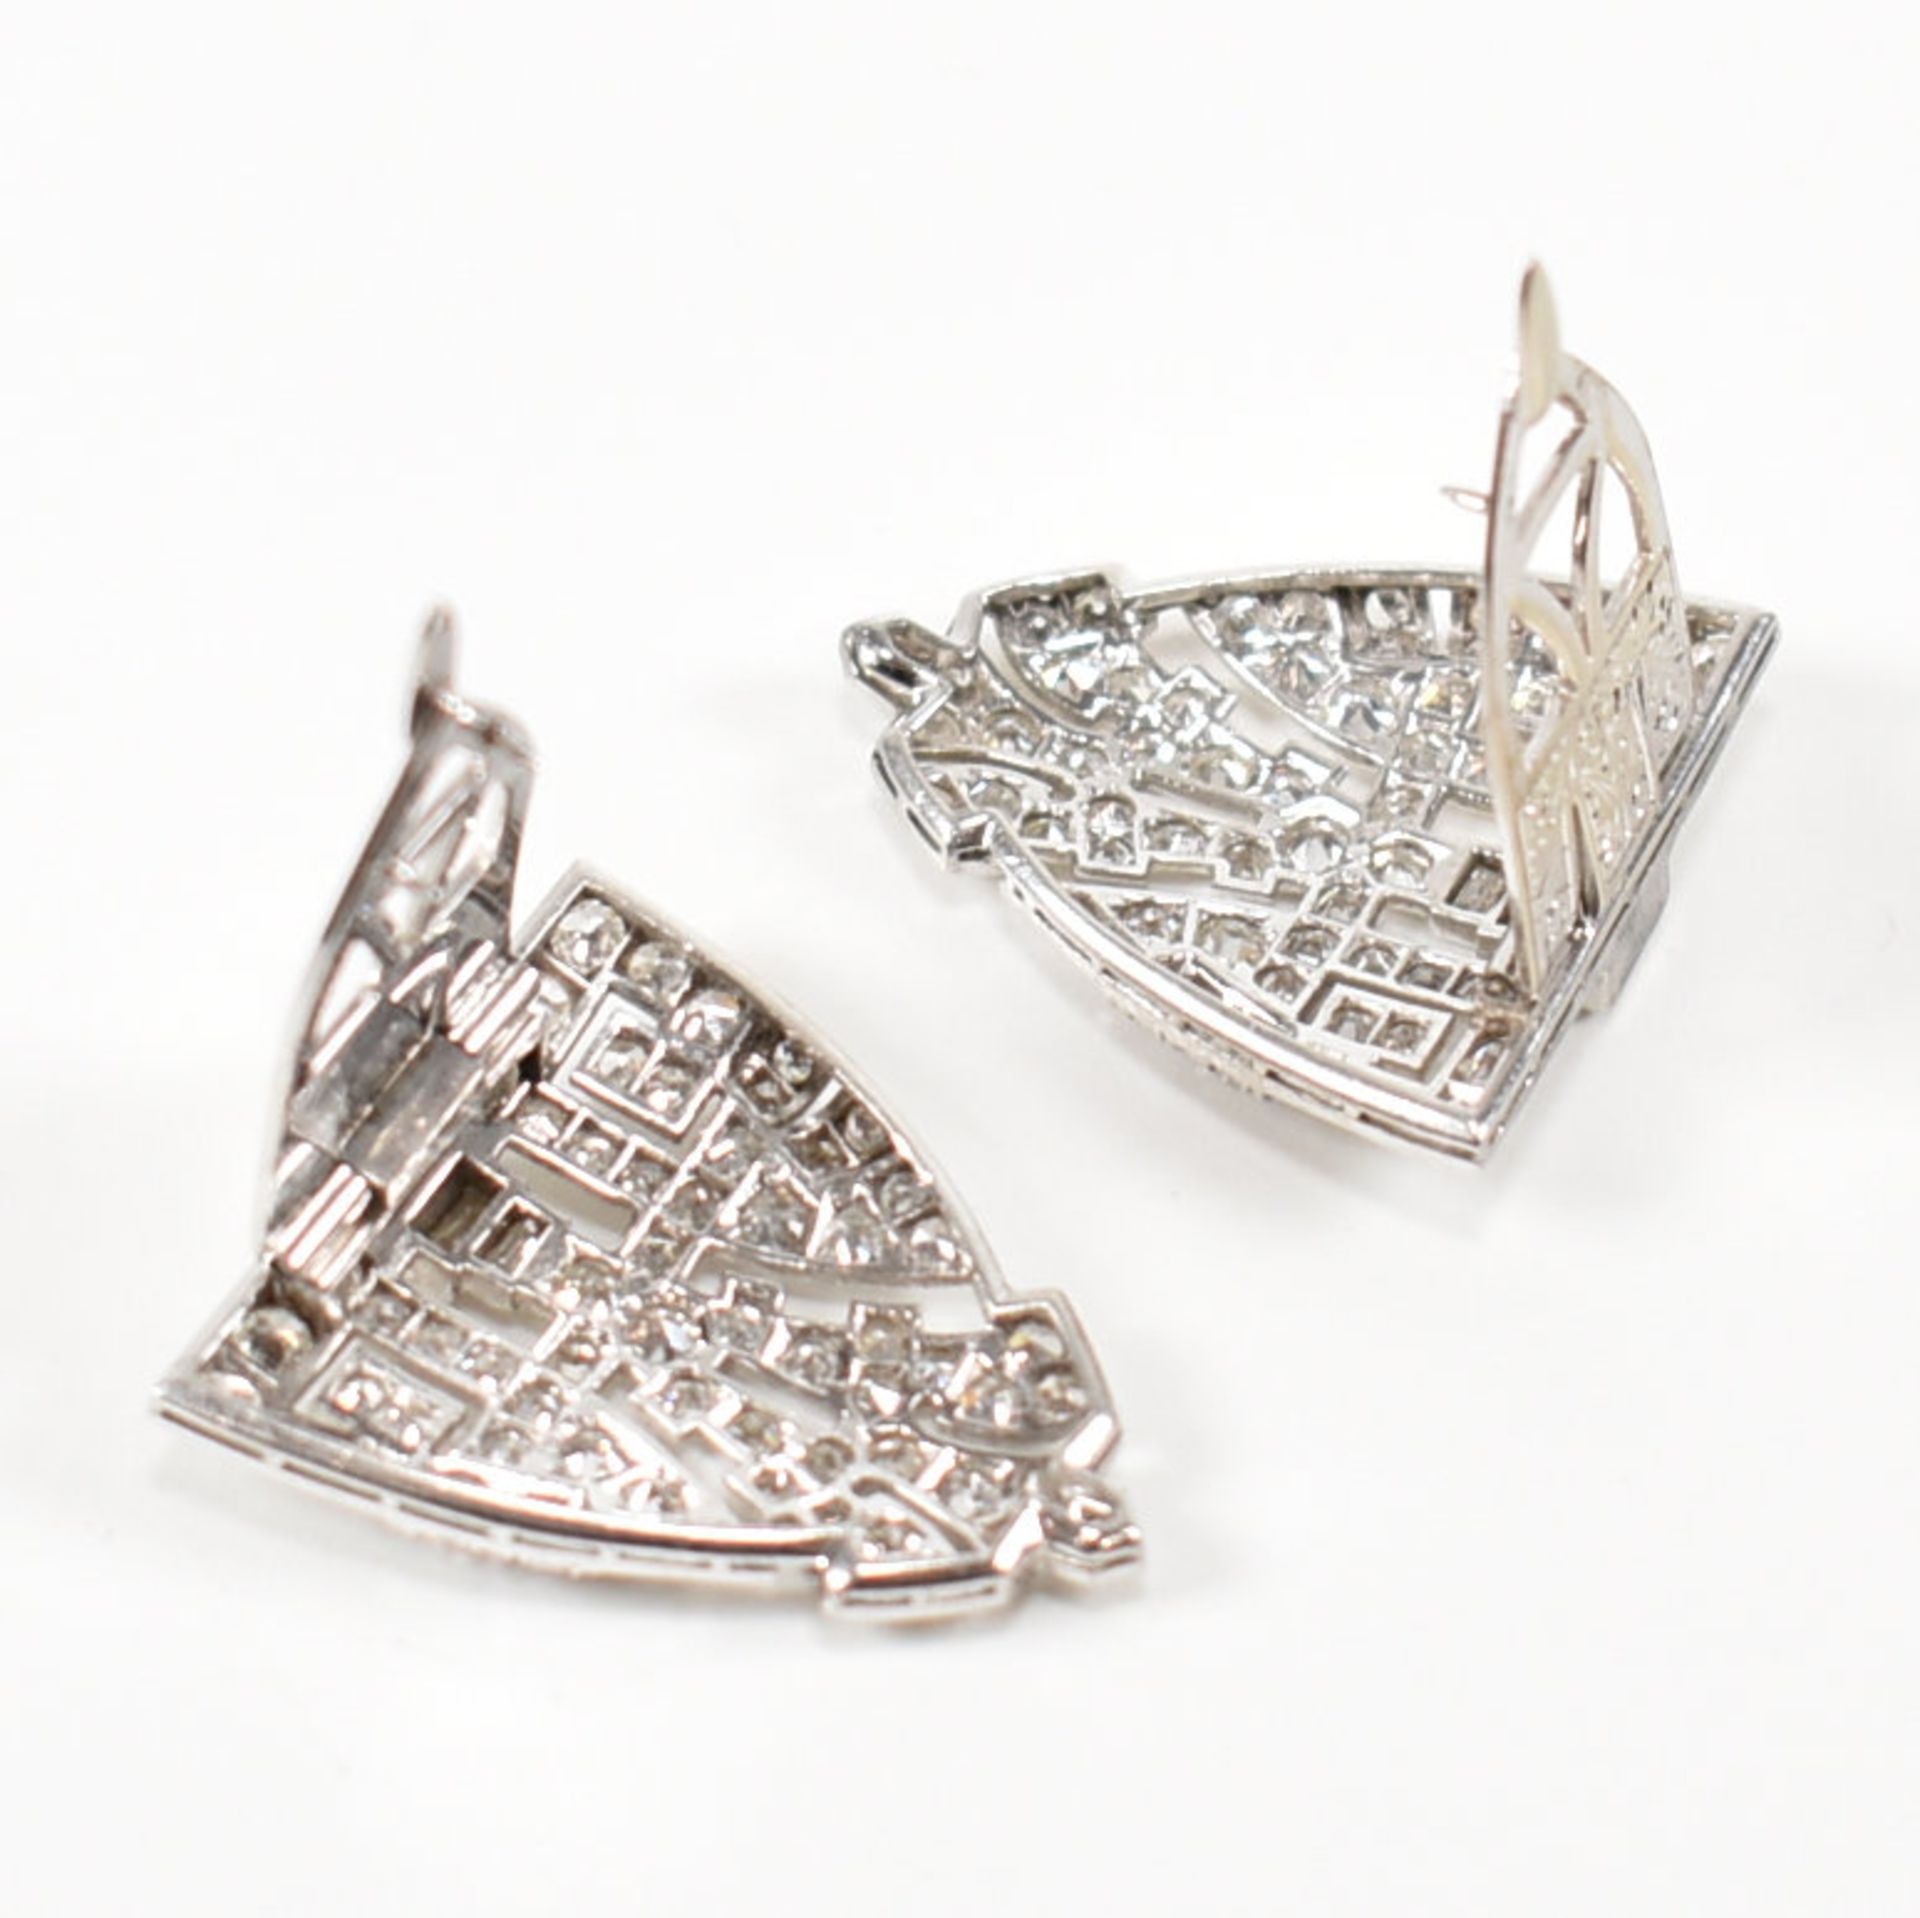 MAPPIN & WEBB - PAIR OF ART DECO DIAMOND DOUBLE DRESS CLIPS - Image 6 of 10